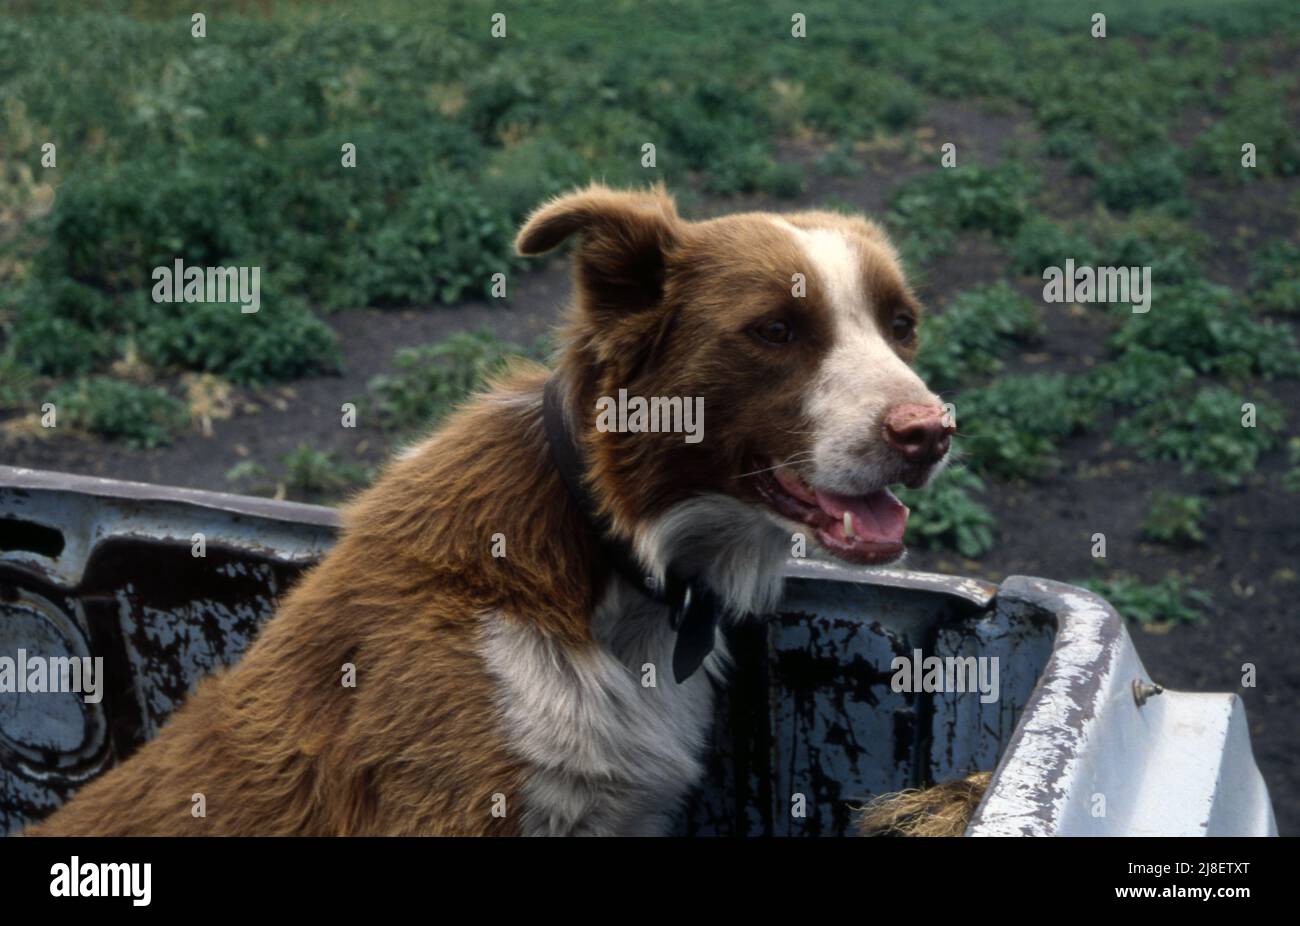 BROWN AND WHITE AUSTRALIAN KELPIE WORKING DOG IN THE BACK TRAY OF A WORK VEHICLE.  RURAL NEW SOUTH WALES, AUSTRALIA. Stock Photo